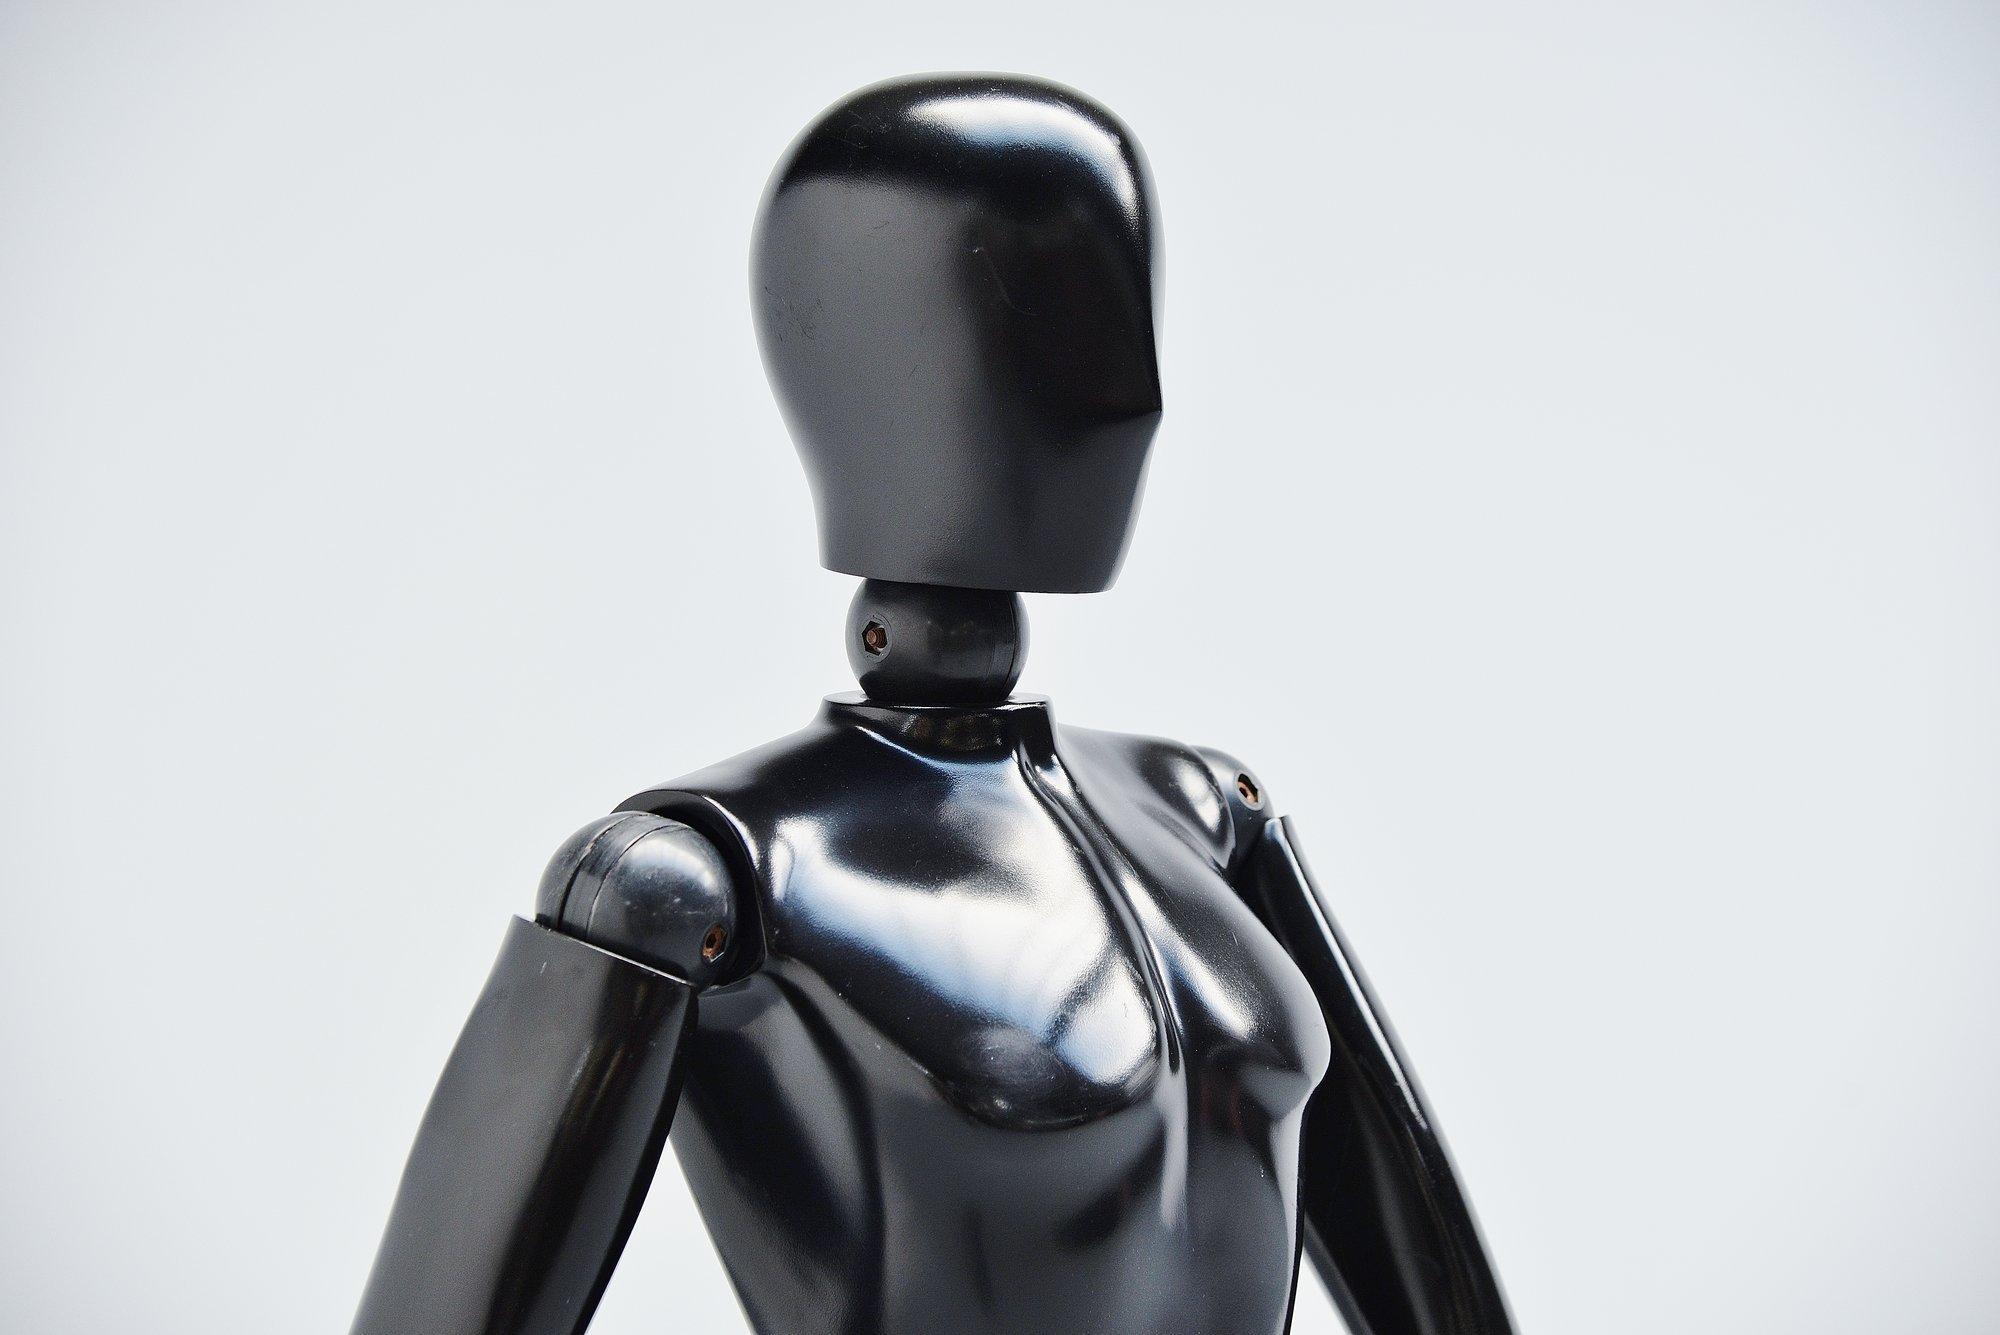 Very nice and highly decorative adjustable mannequin designed and manufactured by Artevetrina, Italy 1970. This black plastic mannequin is made of solid and hard plastic and is fully adjustable into several different positions for different uses.